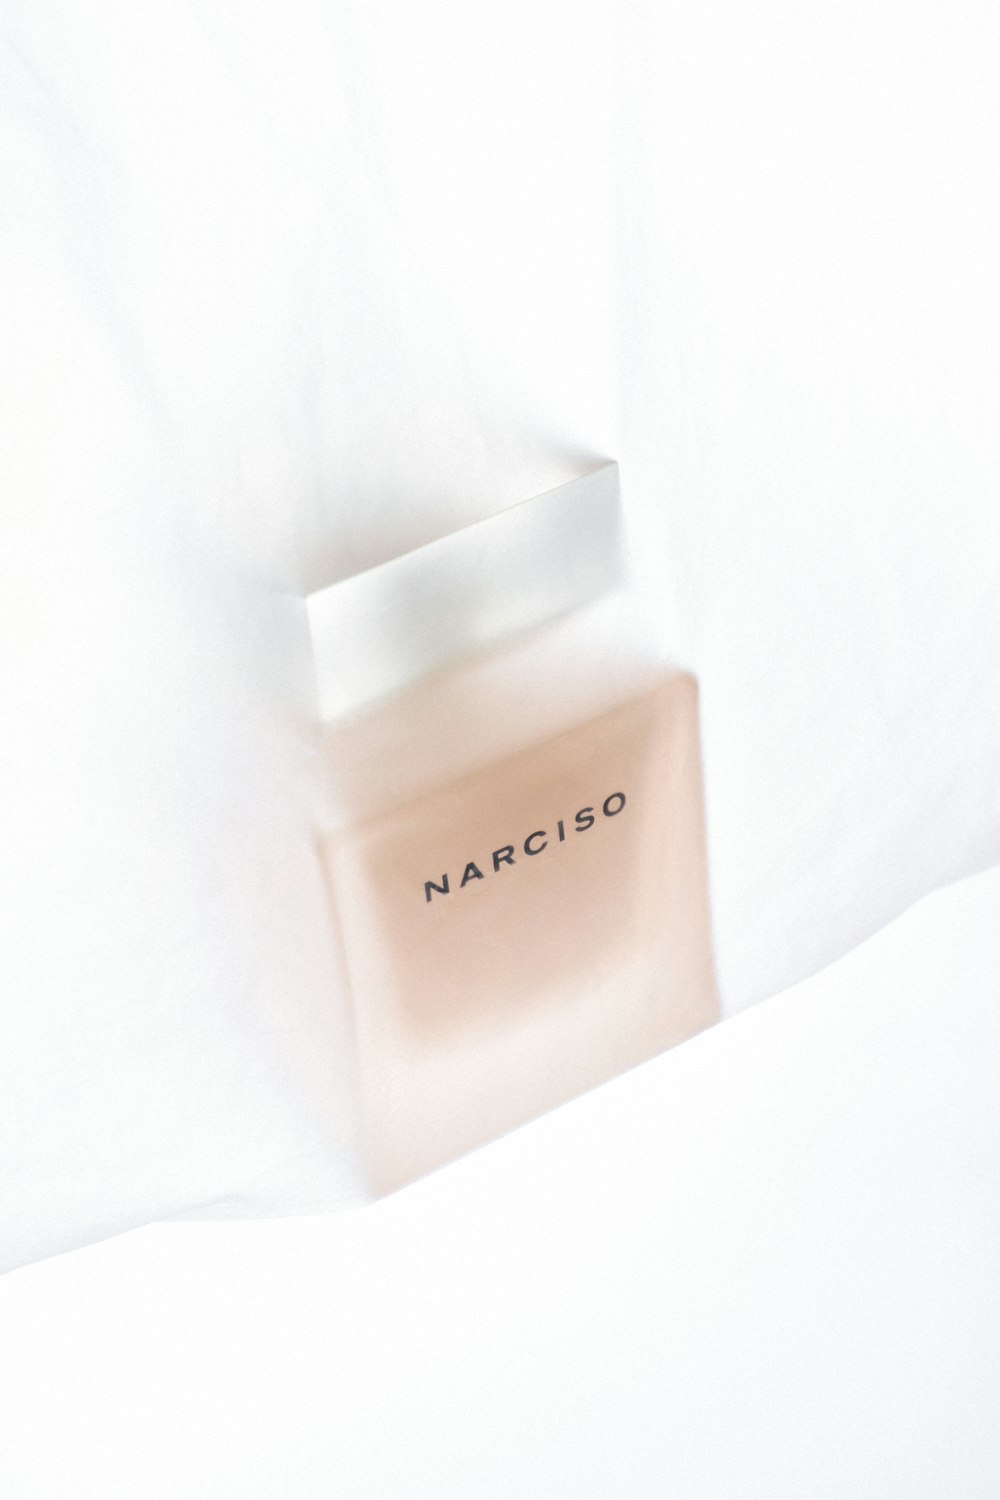 a bottle of narciso on a white sheet